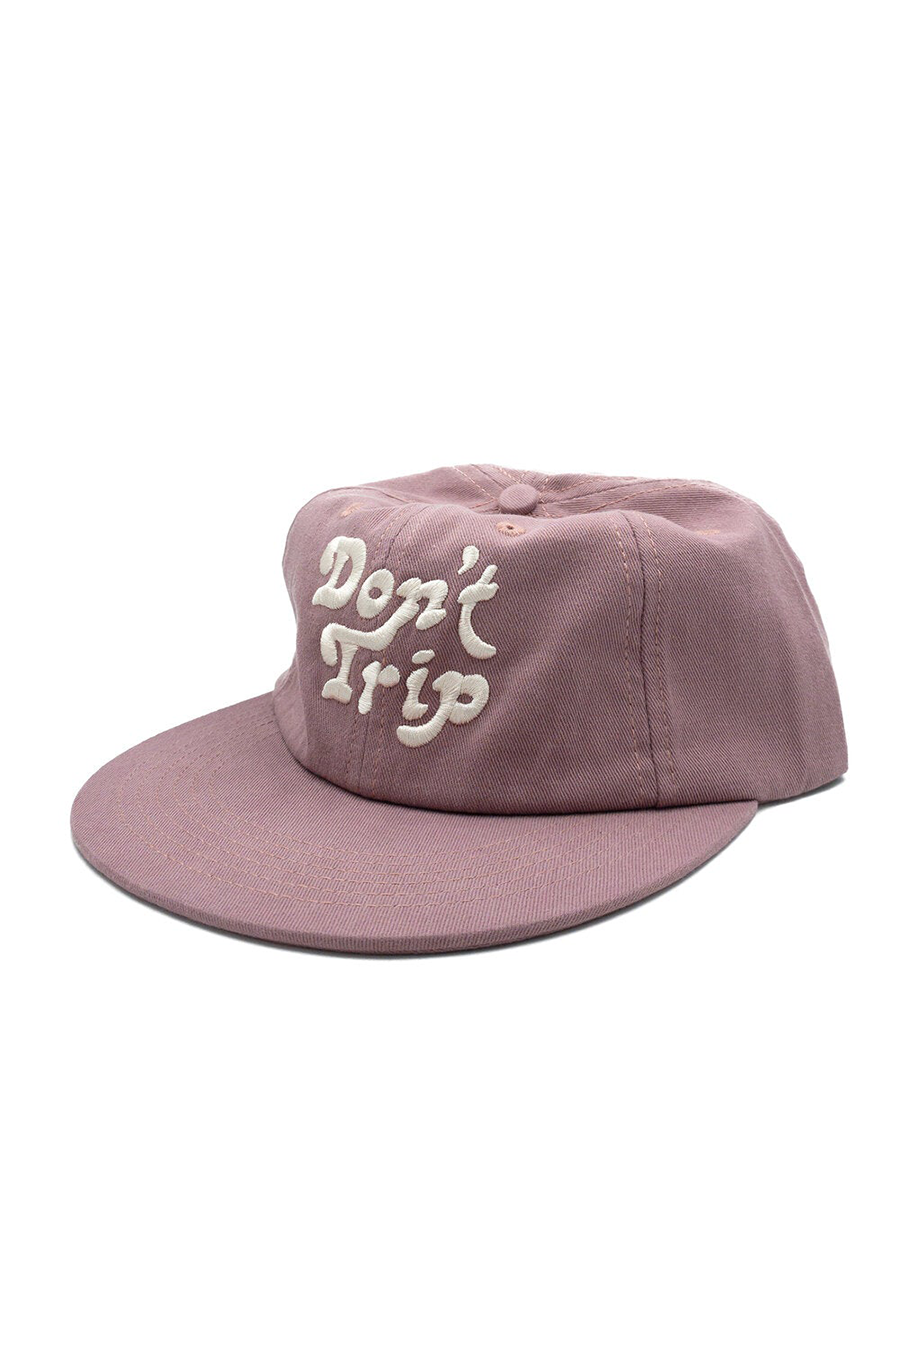 Don't Trip Unstructured Hat | Dusty Rose - Main Image Number 1 of 1